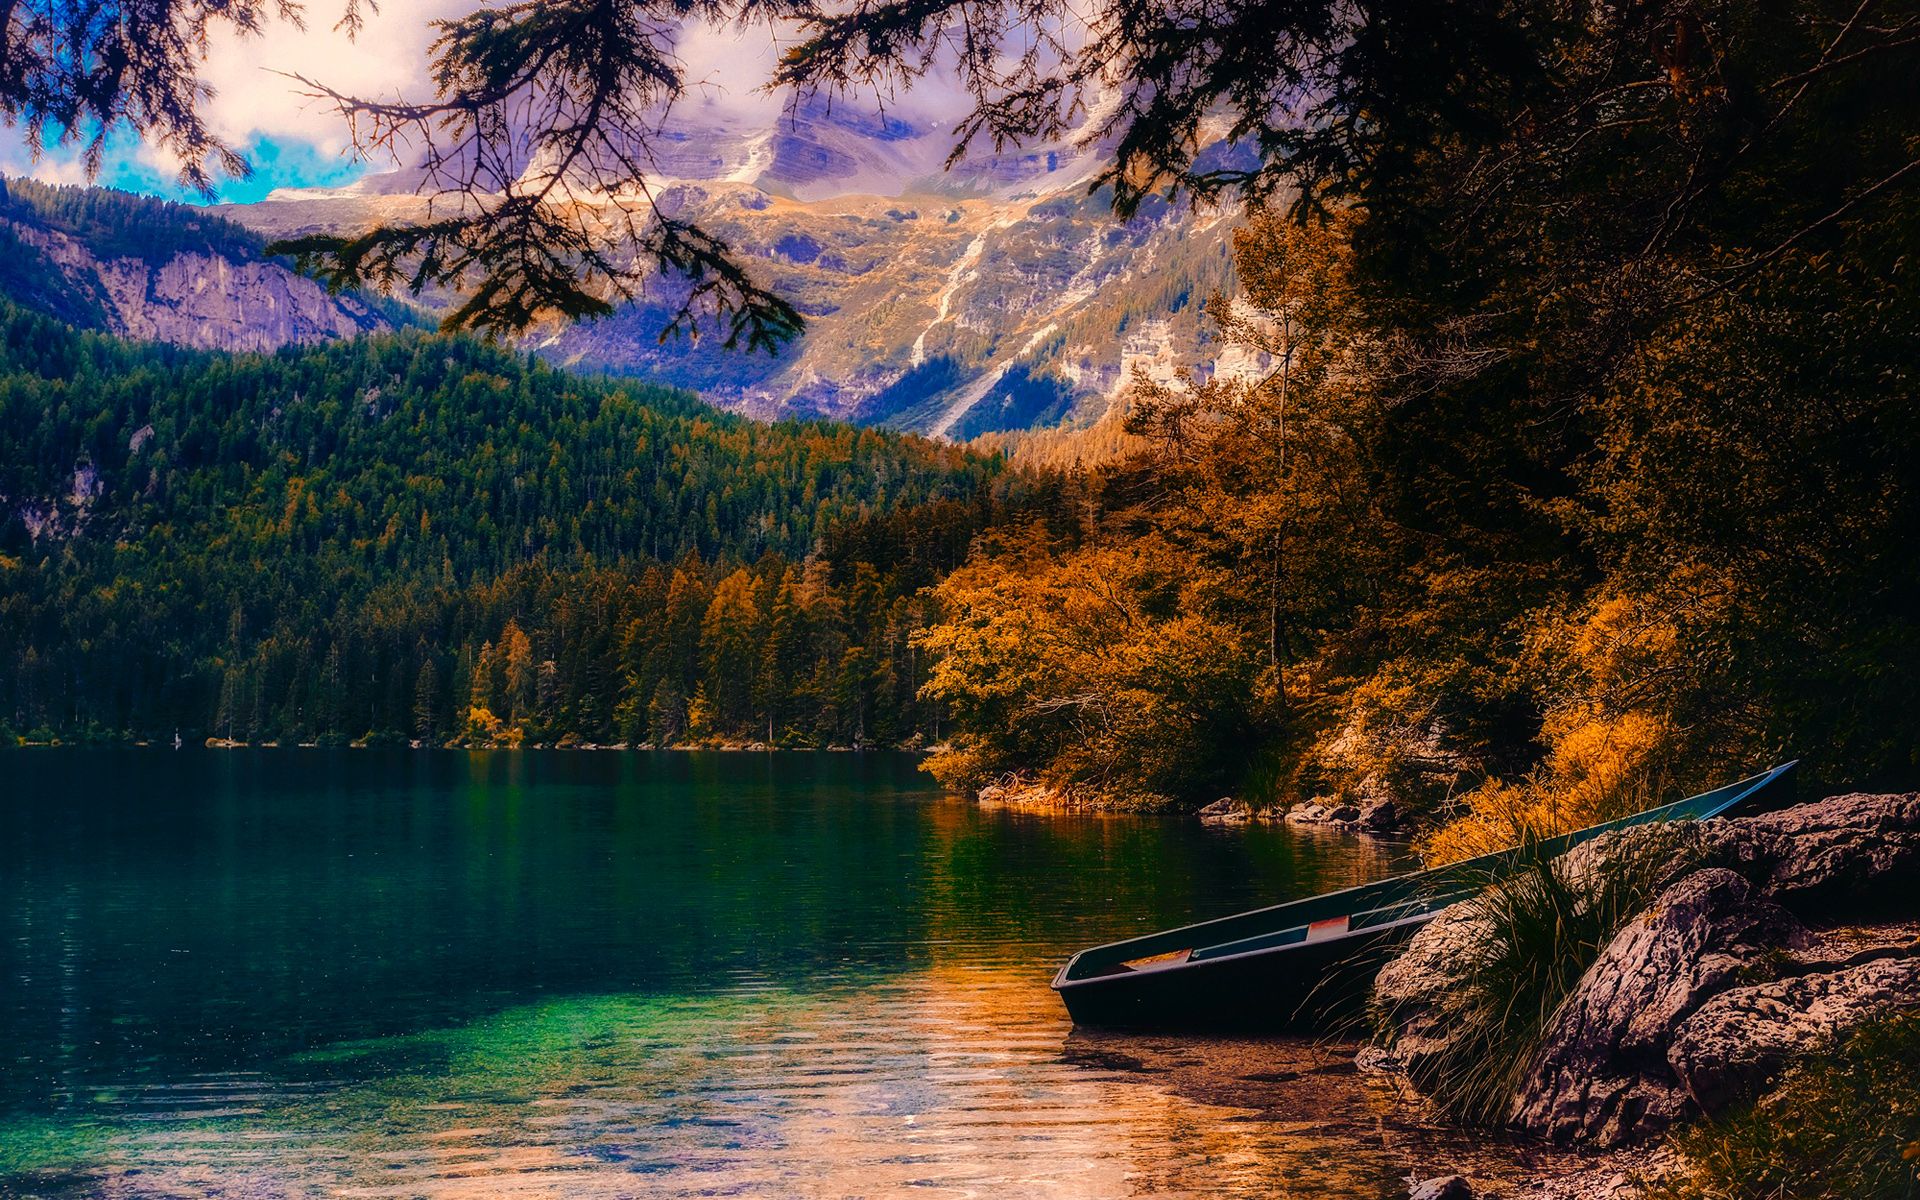 Download wallpaper Italy, lake, forest, autumn, HDR, mountains